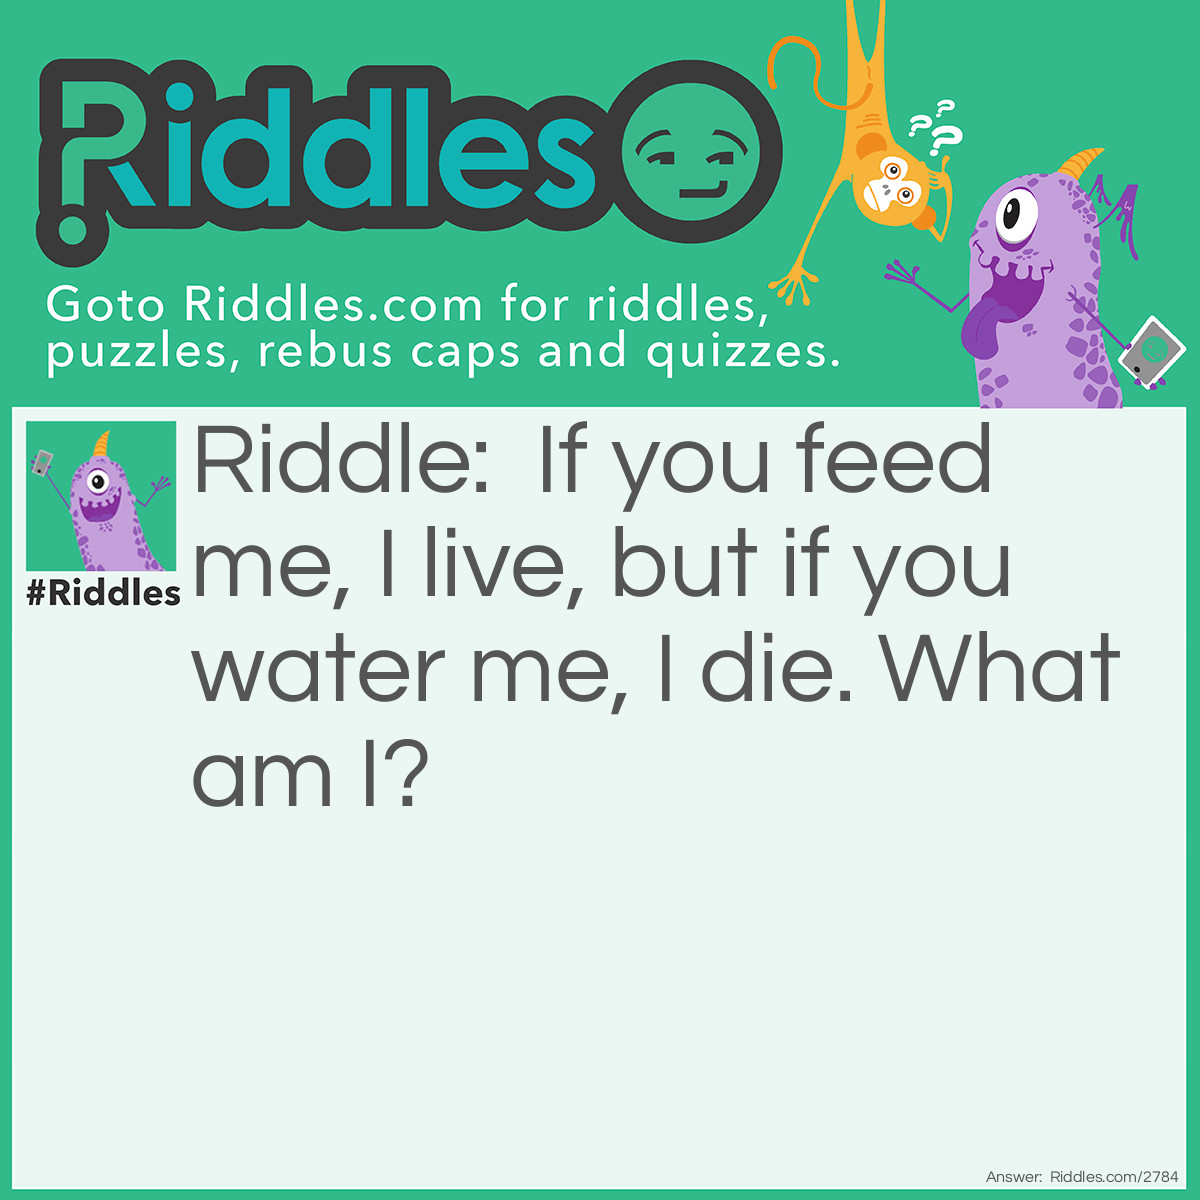 Riddle: If you feed me, I live, but if you water me, I die. What am I? Answer: A Fire